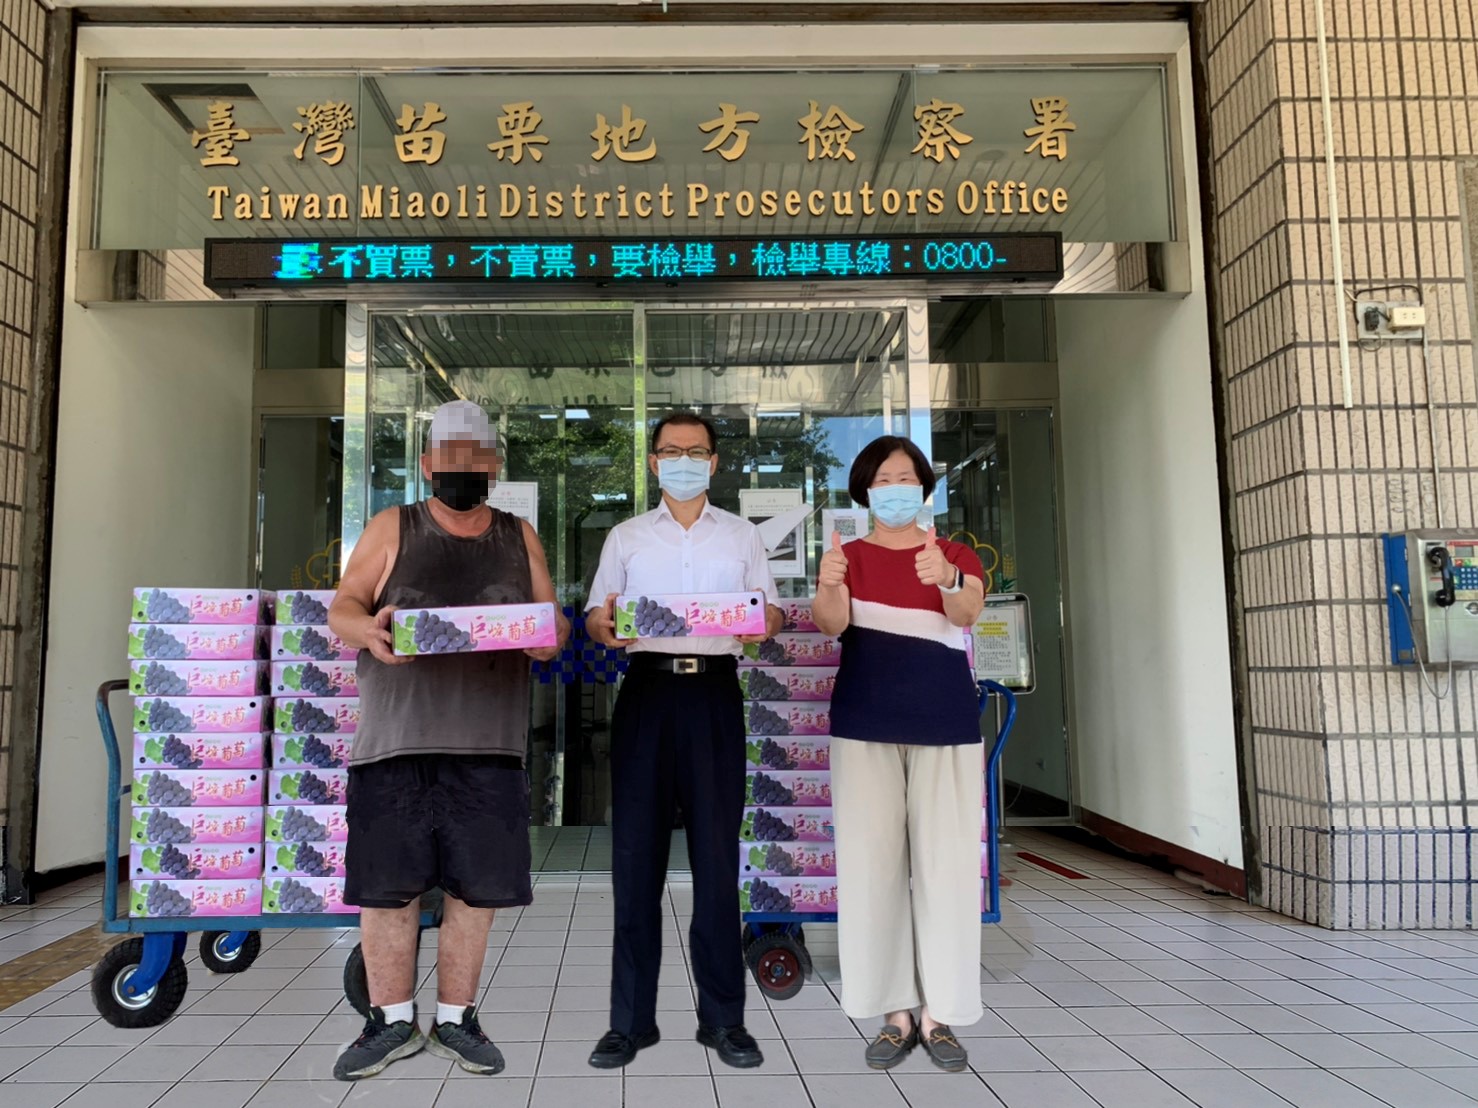 Prosecutor General Chen Songji takes action to support rehabilitated persons